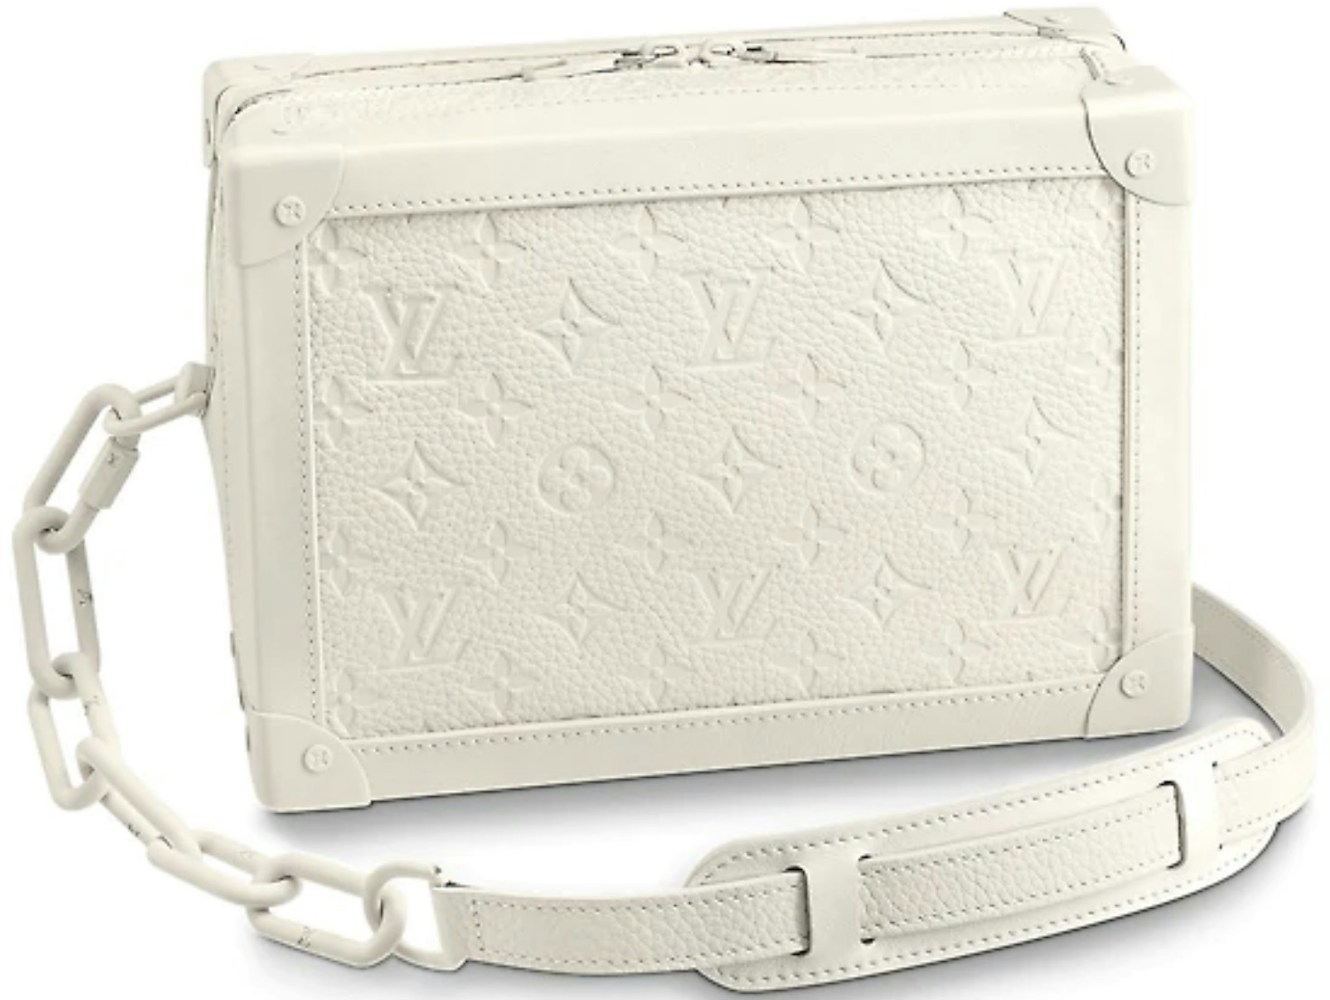 Louis Vuitton Soft Trunk Monogram White in Taurillon with